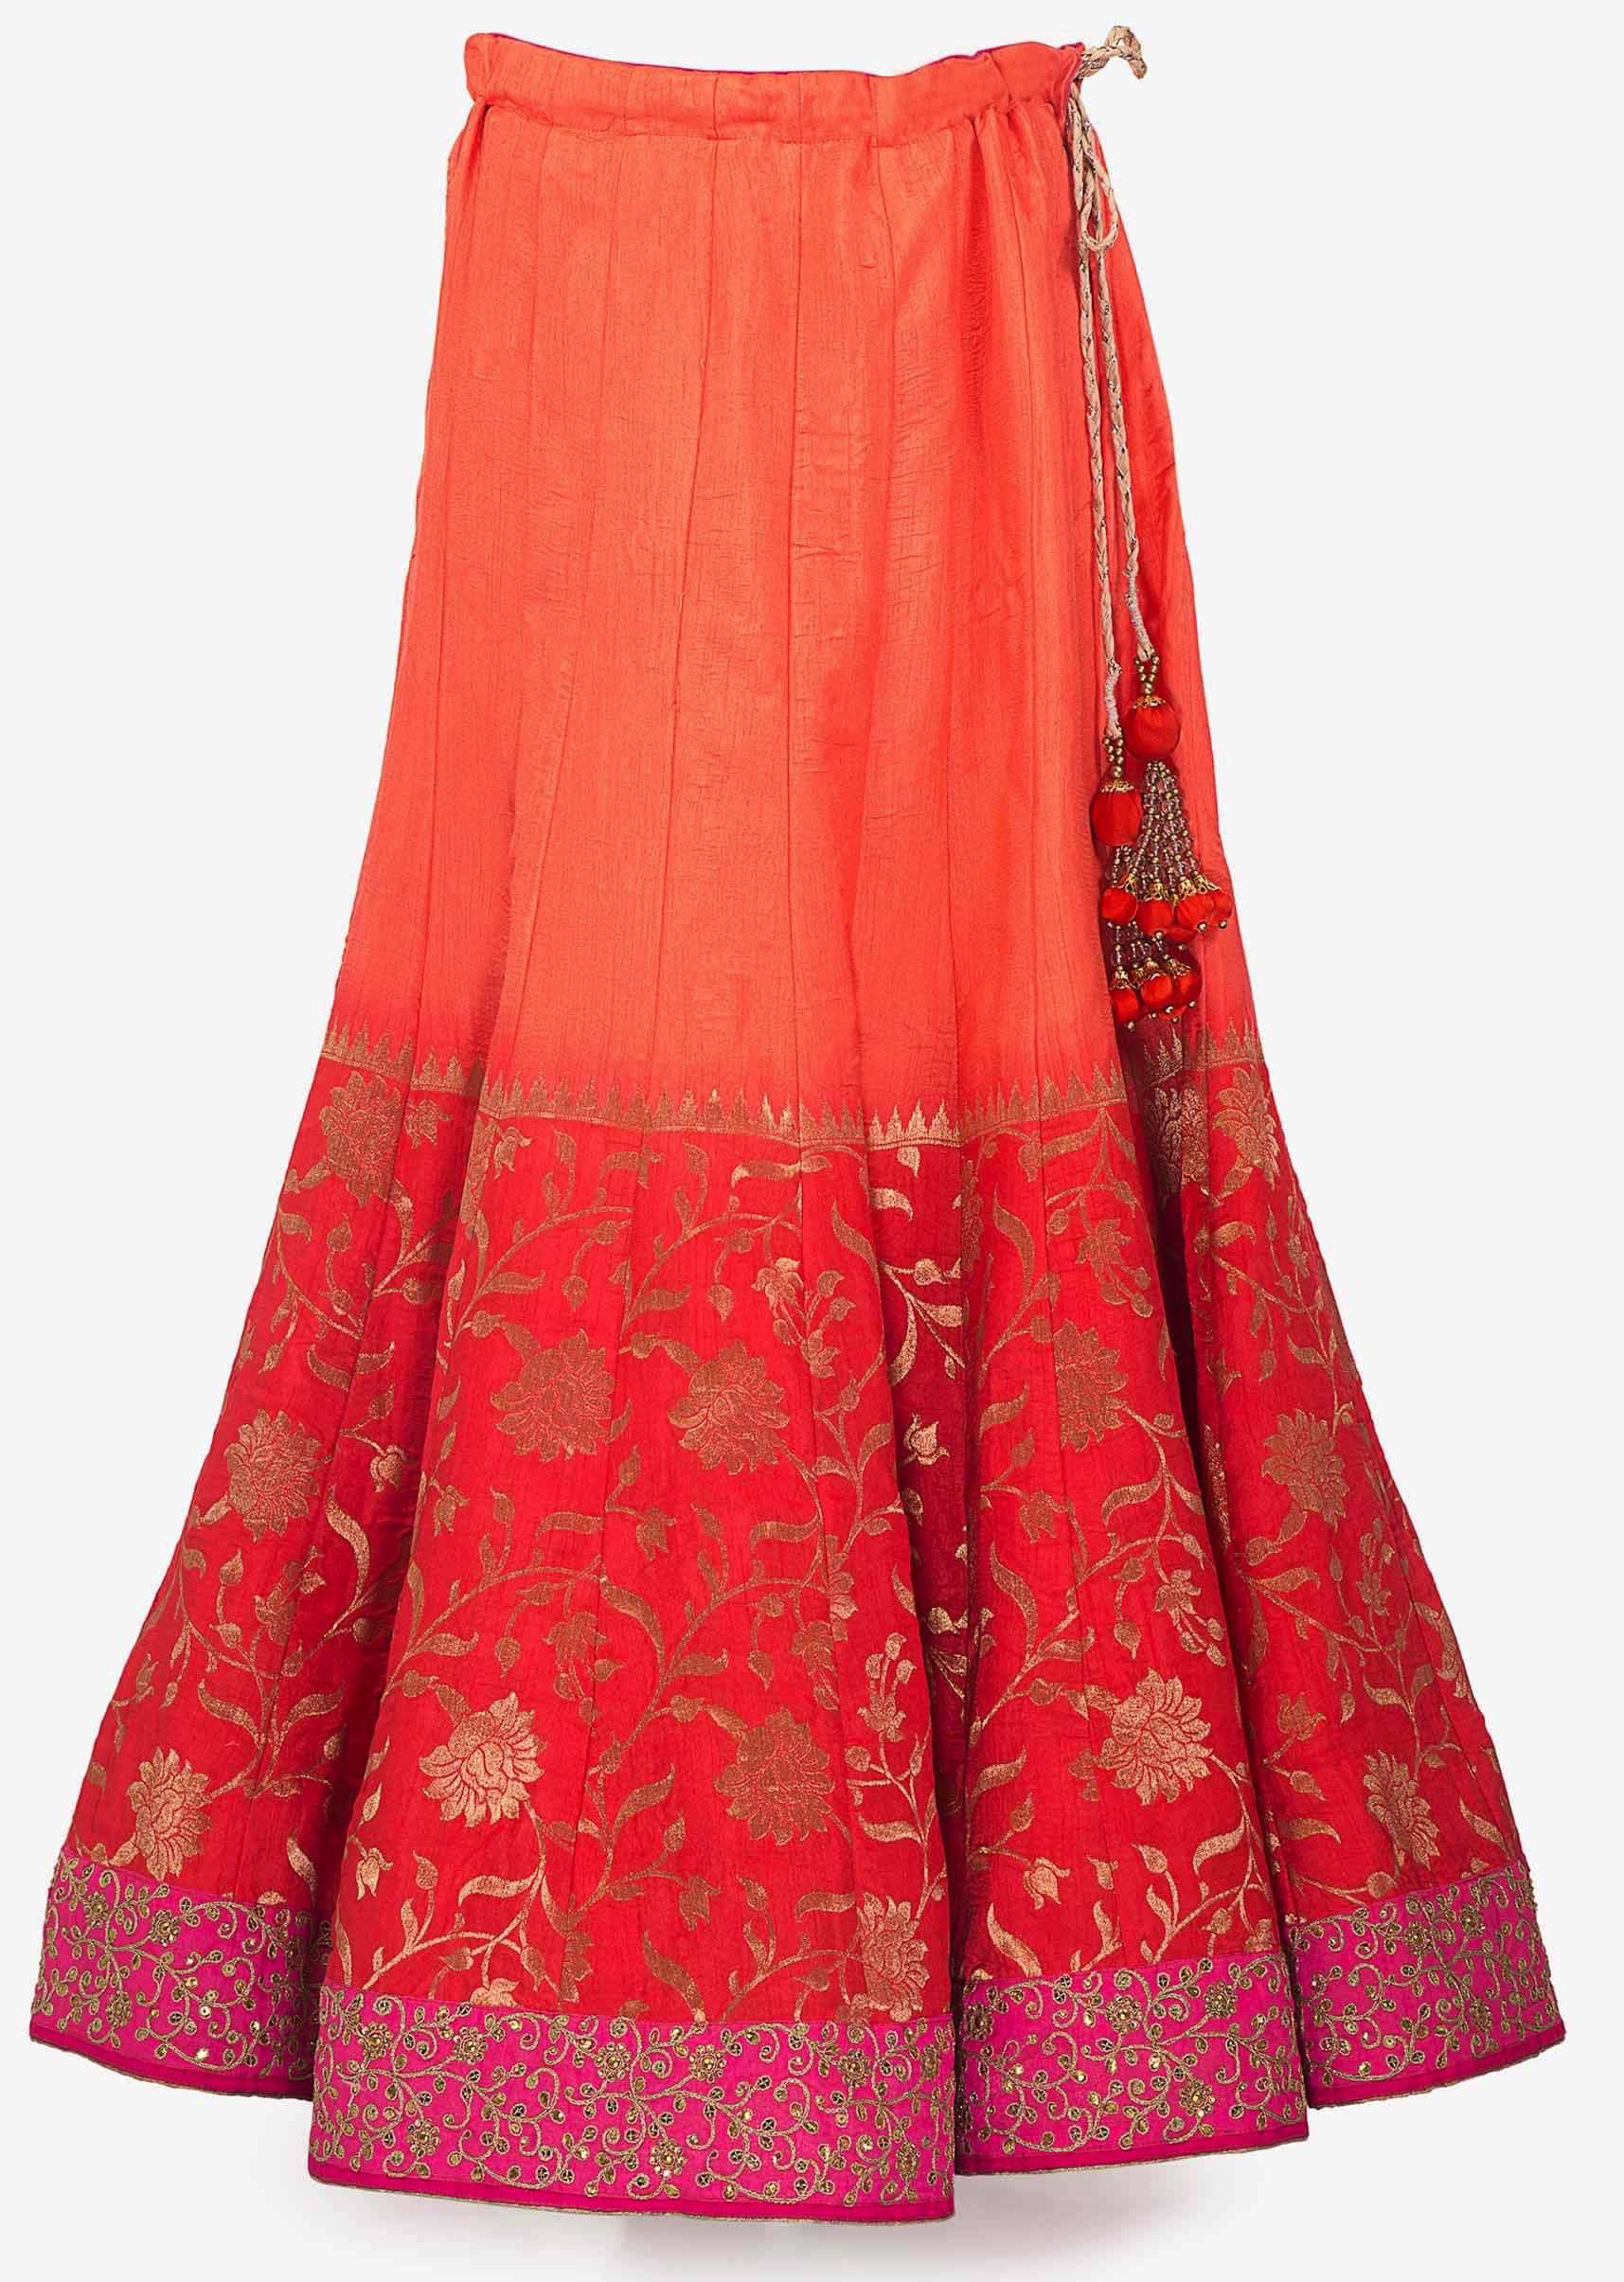 Coral and peach shaded lehenga matched with ready blouse only on Kalki